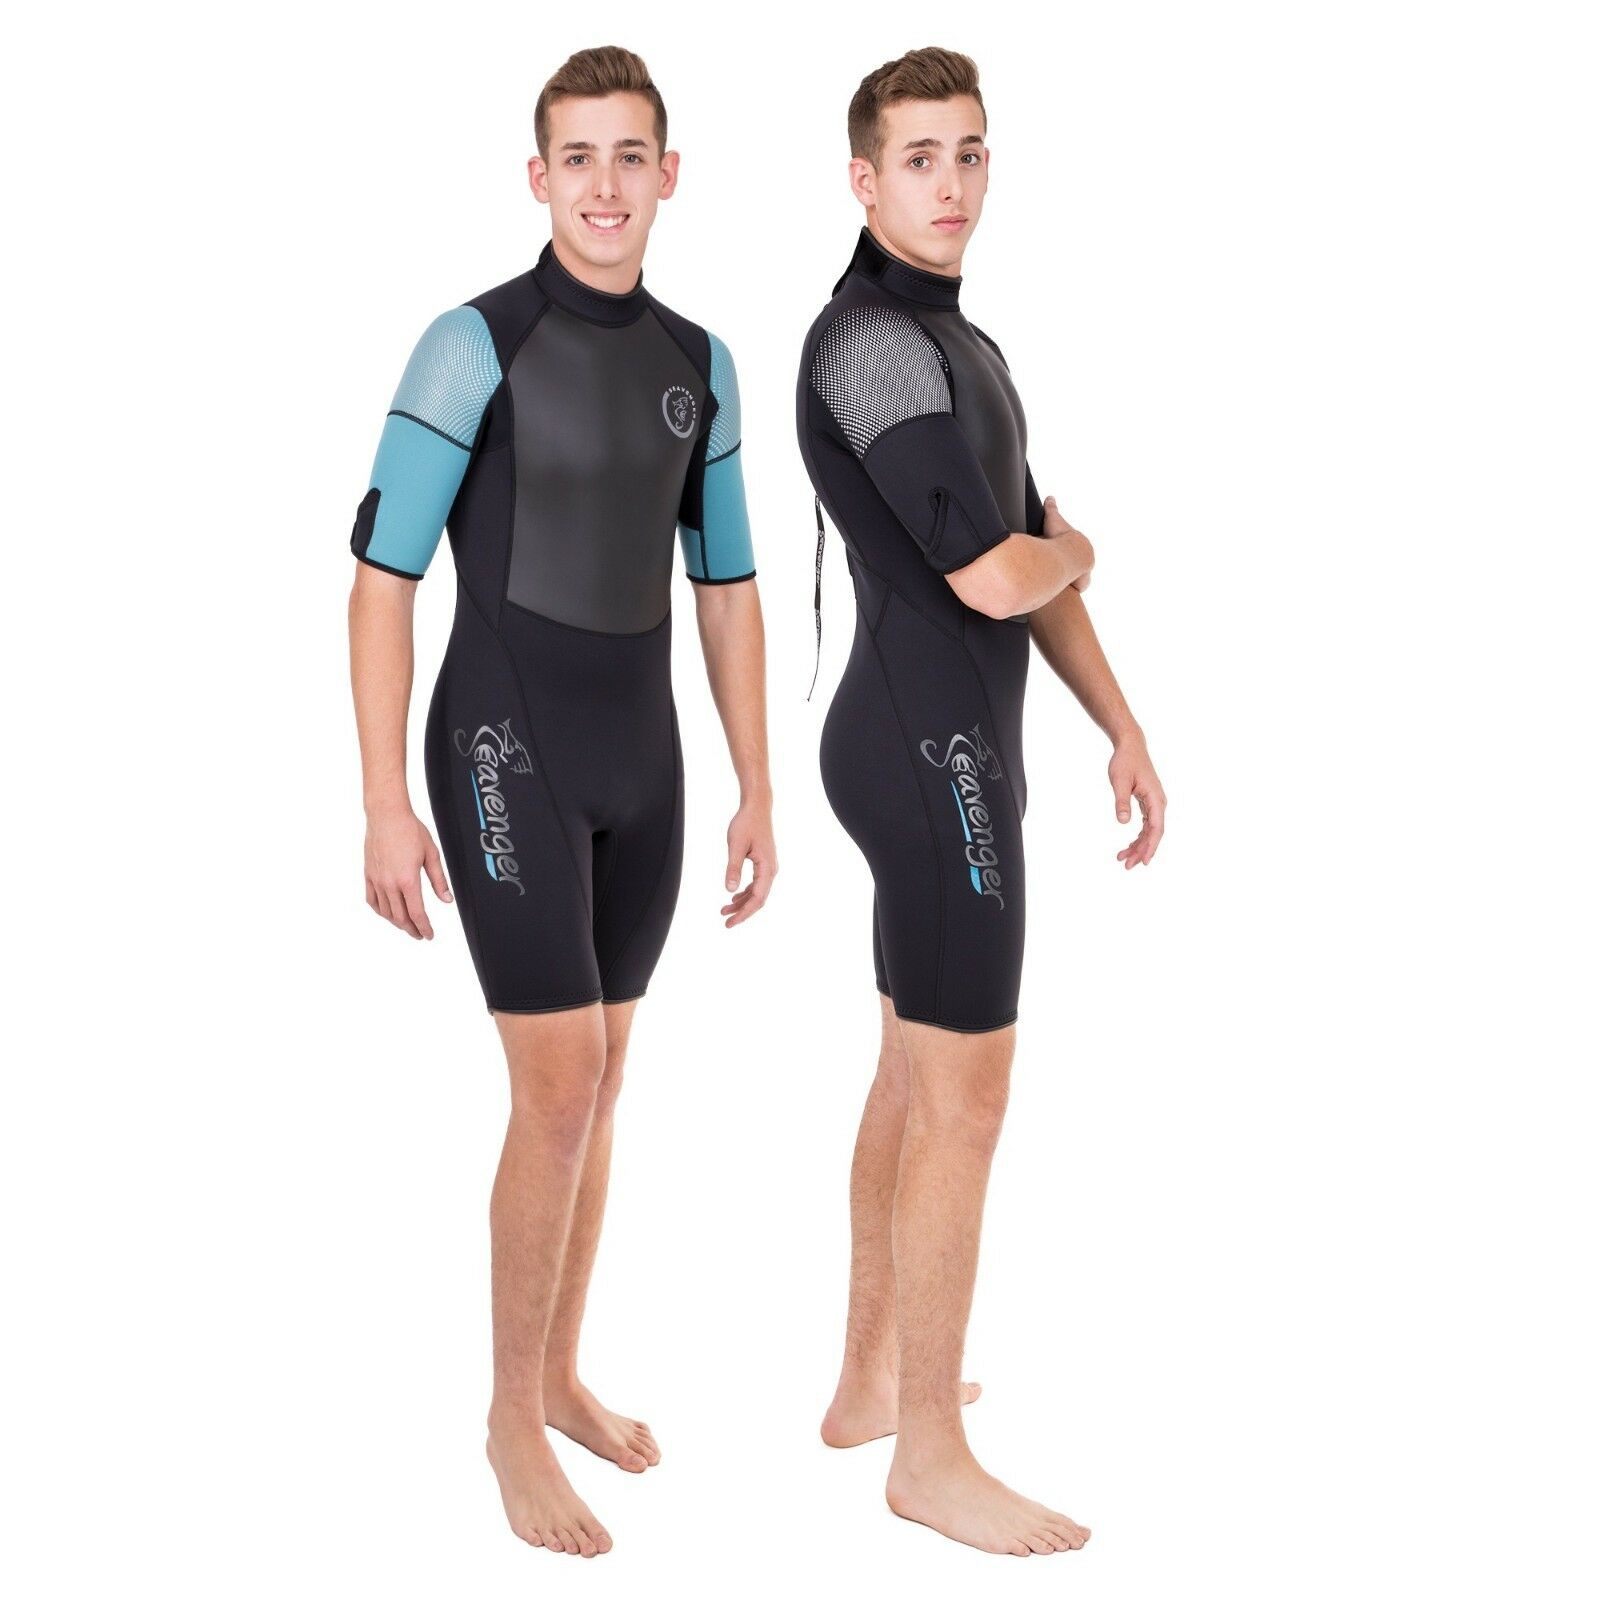 Preowned Seavenger Men’s 3mm Shorty Wetsuit With Rubberized Stomach